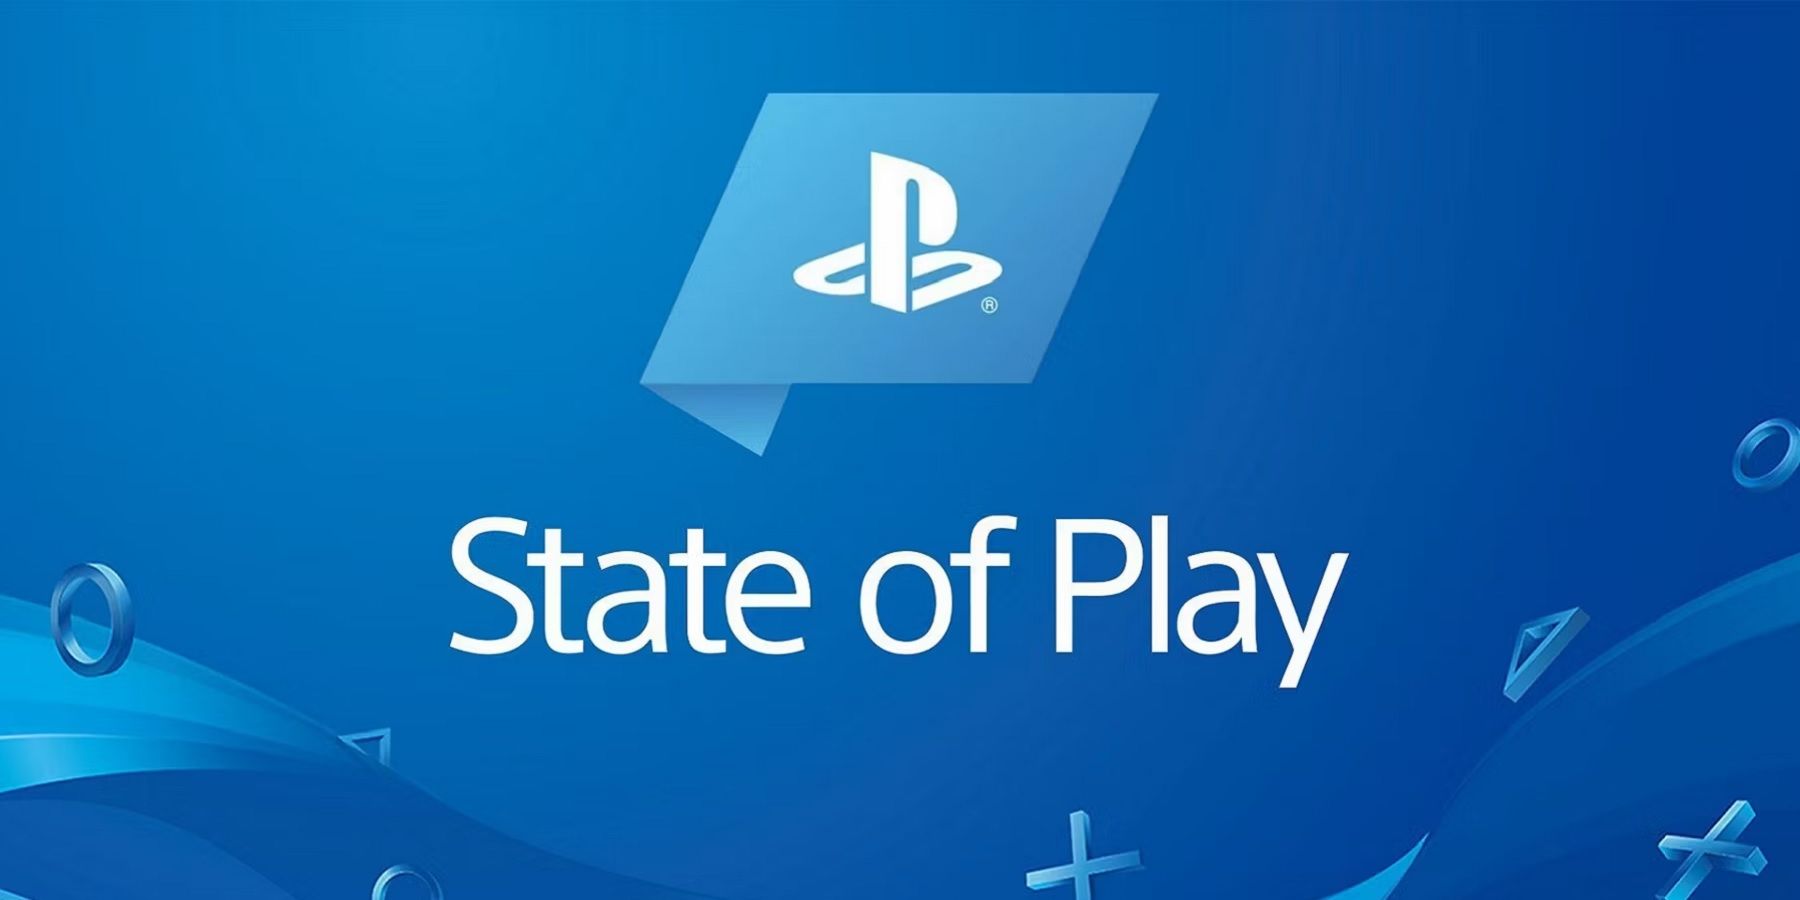 PlayStation Announces State of Play for September 2022